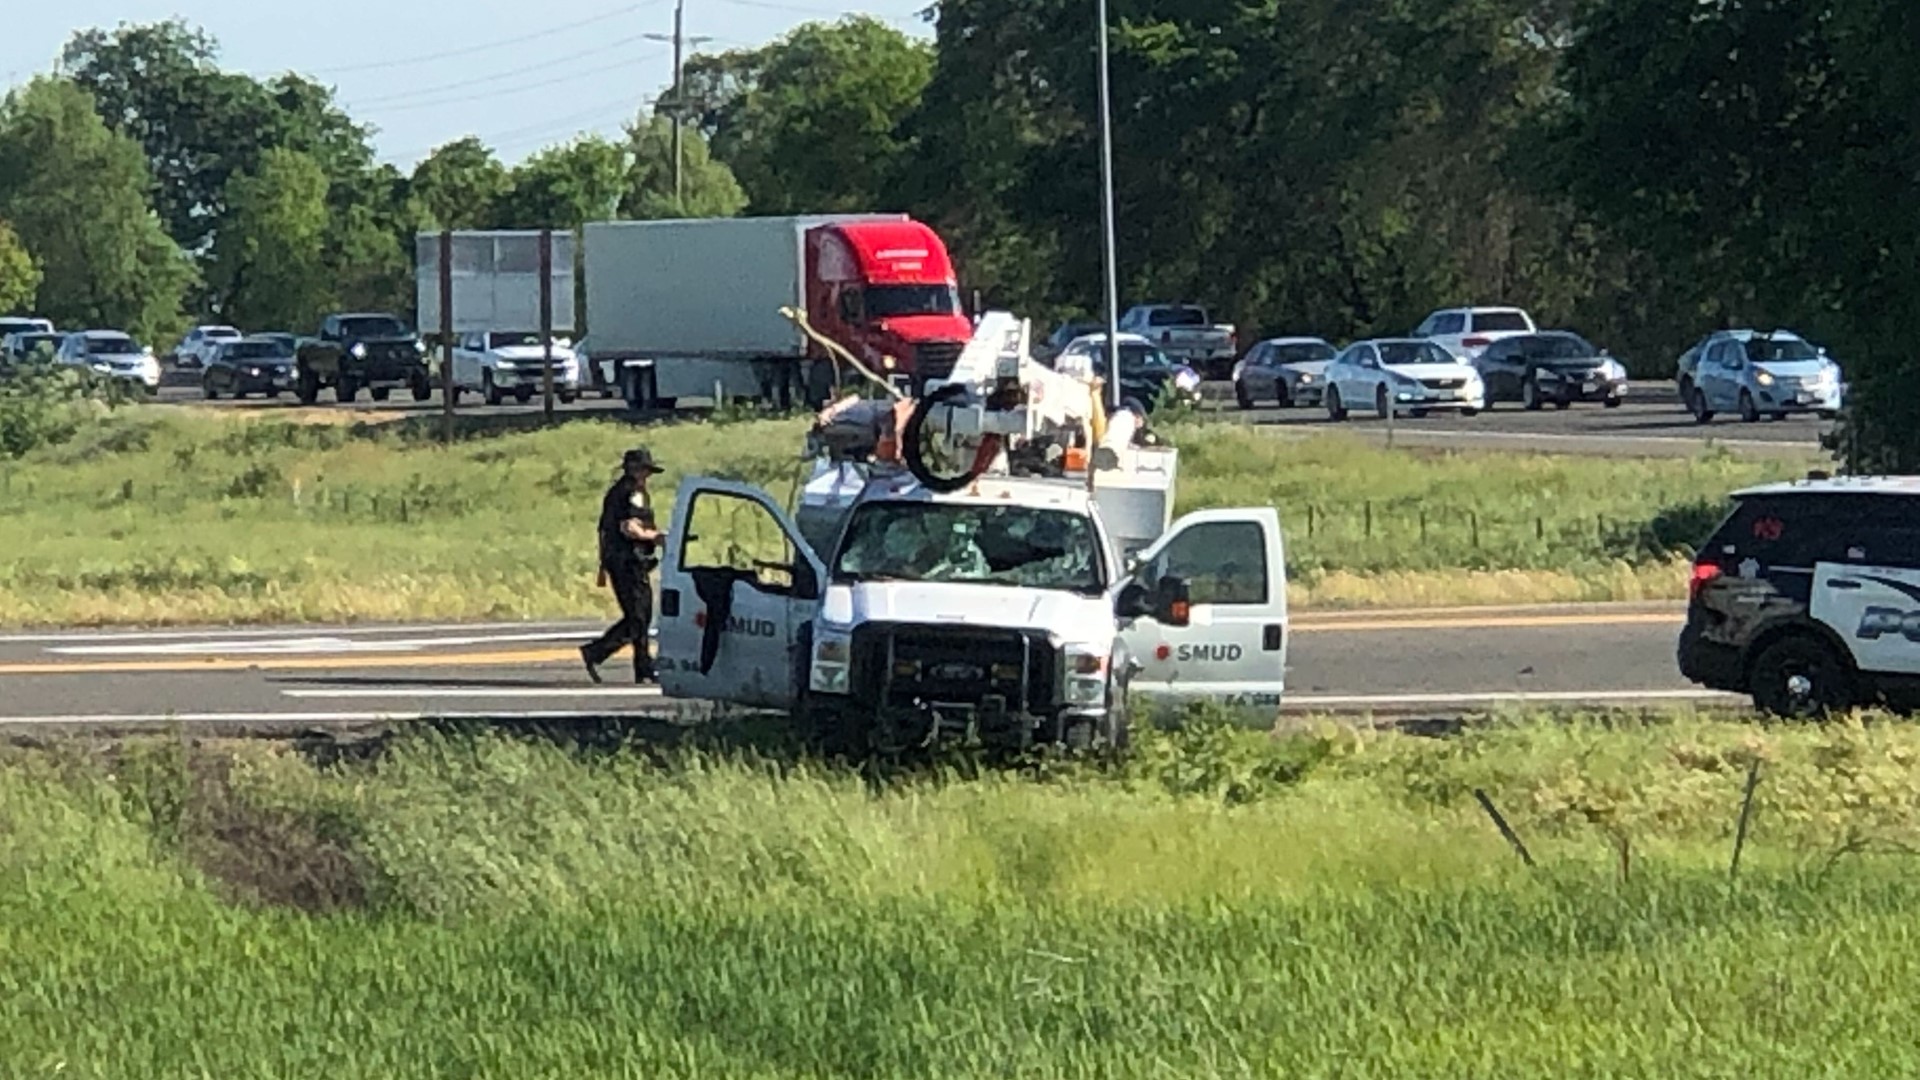 According to the Sacramento County Sheriff’s Office, the vehicle, a full-size SMUD pickup with a boom lift, was taken near Waterman Road and Grant Line Road after the carjacker assaulted a SMUD employee.